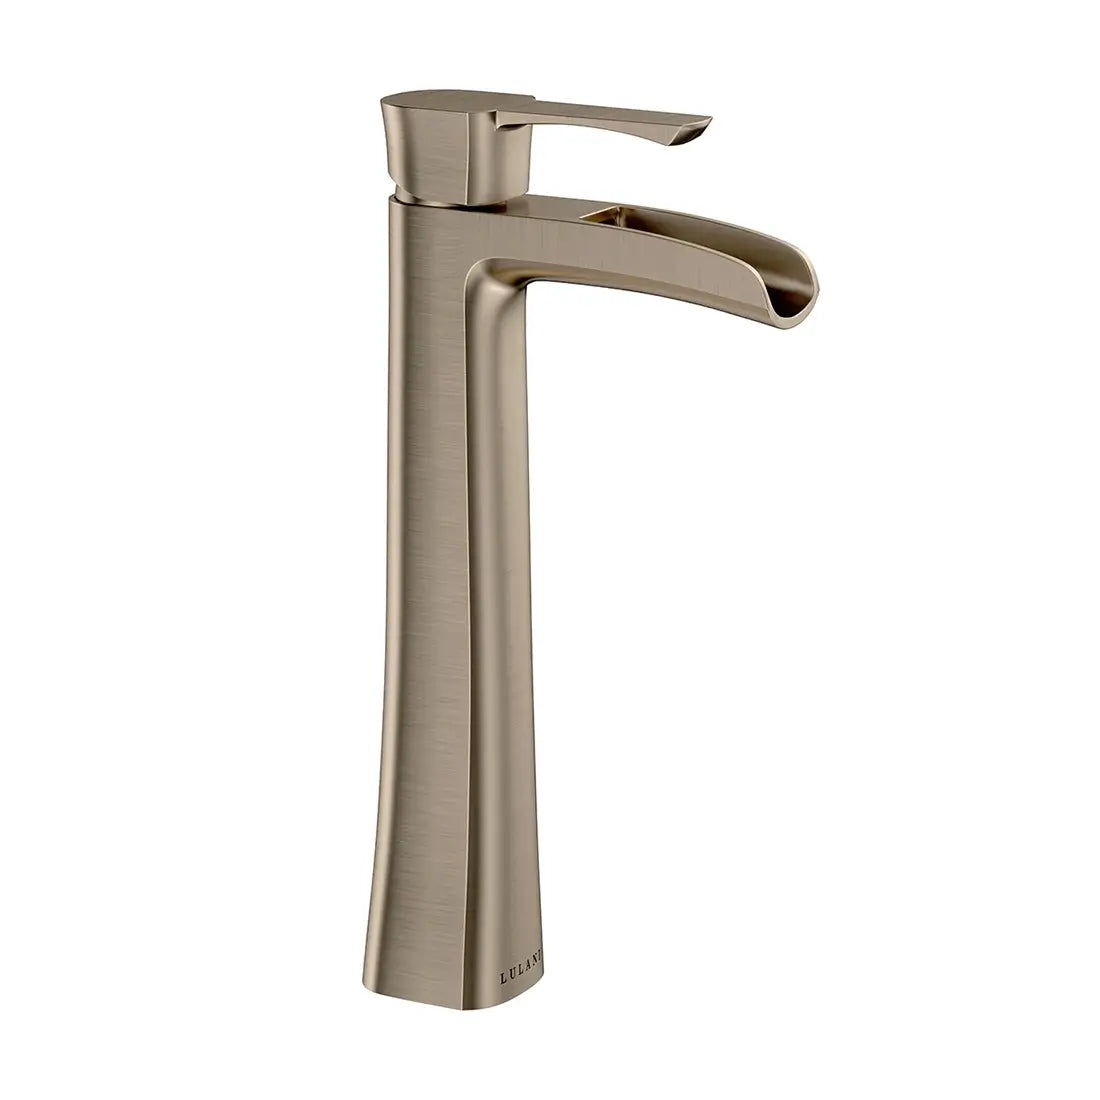 Barbados - Vessel Style Bathroom Faucet with drain assembly Brushed Nickel